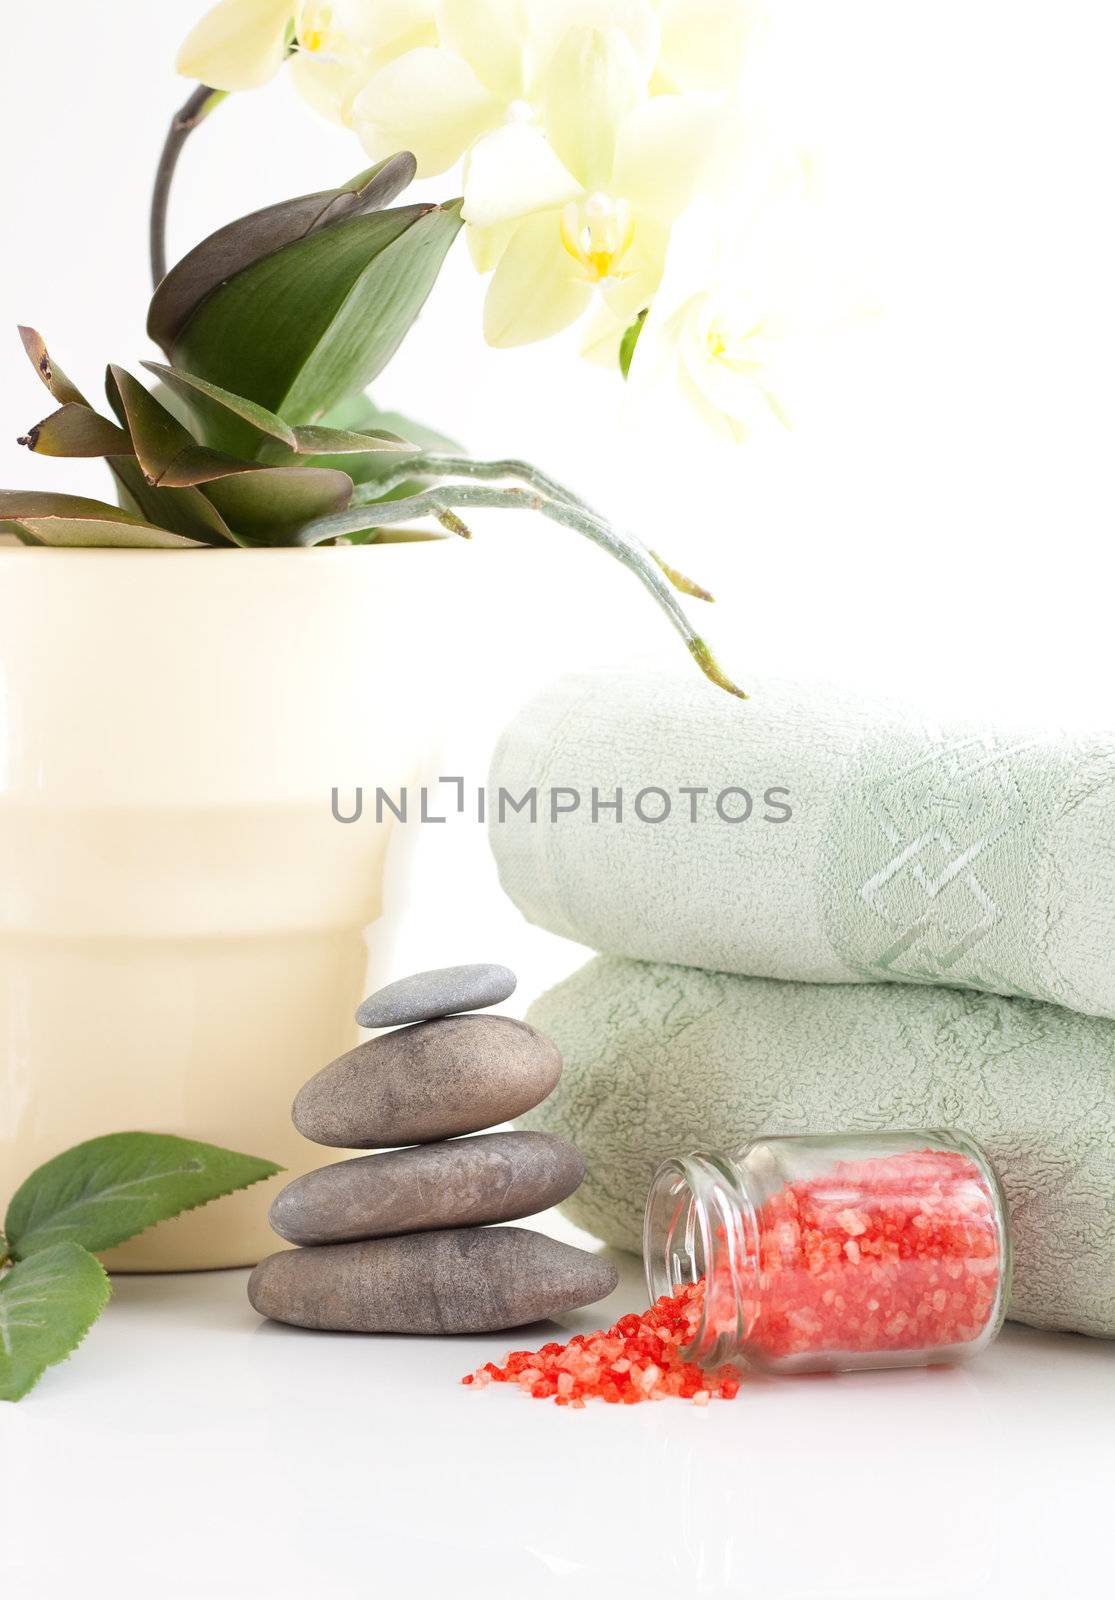 Yellow orchid, massage stones, bath salt and two towels isolated on white background